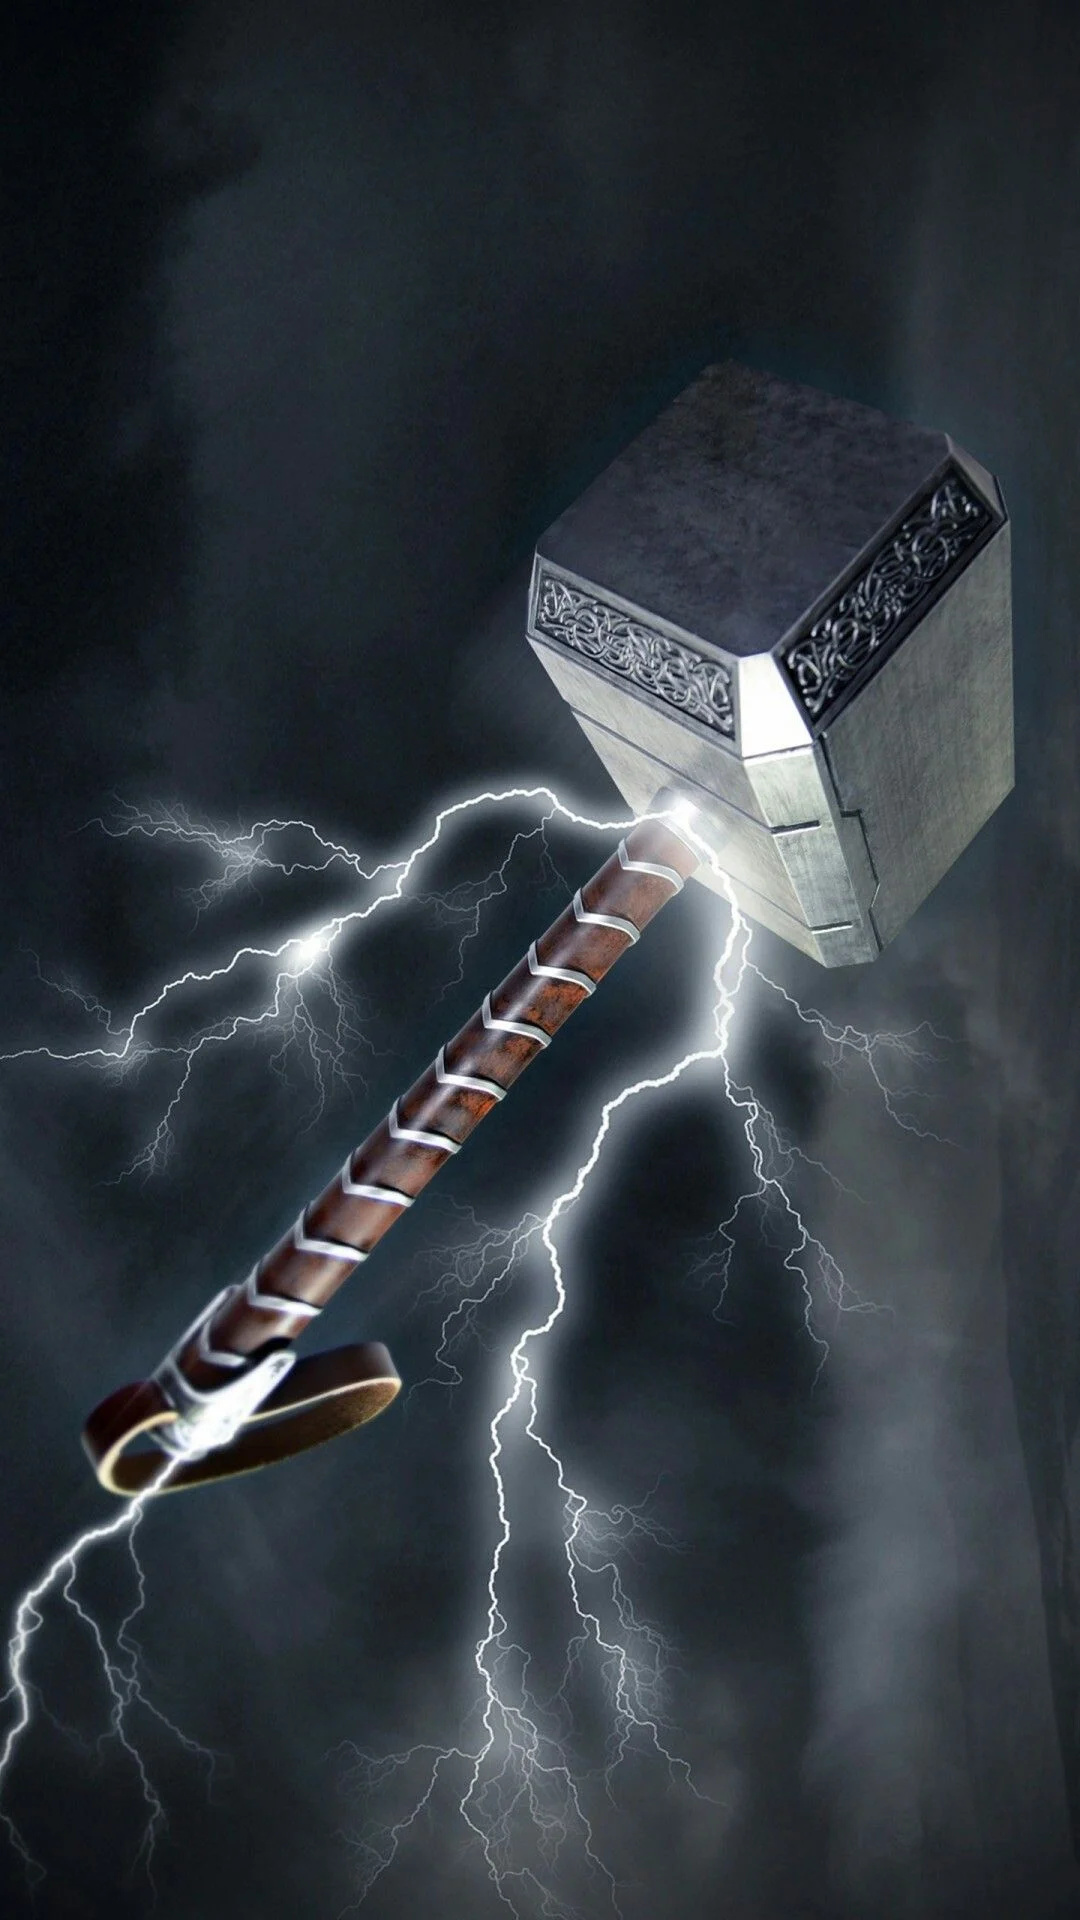 Thors hammer wallpapers, High quality backgrounds, Asgardian mythology, Epic weapon, 1080x1920 Full HD Phone